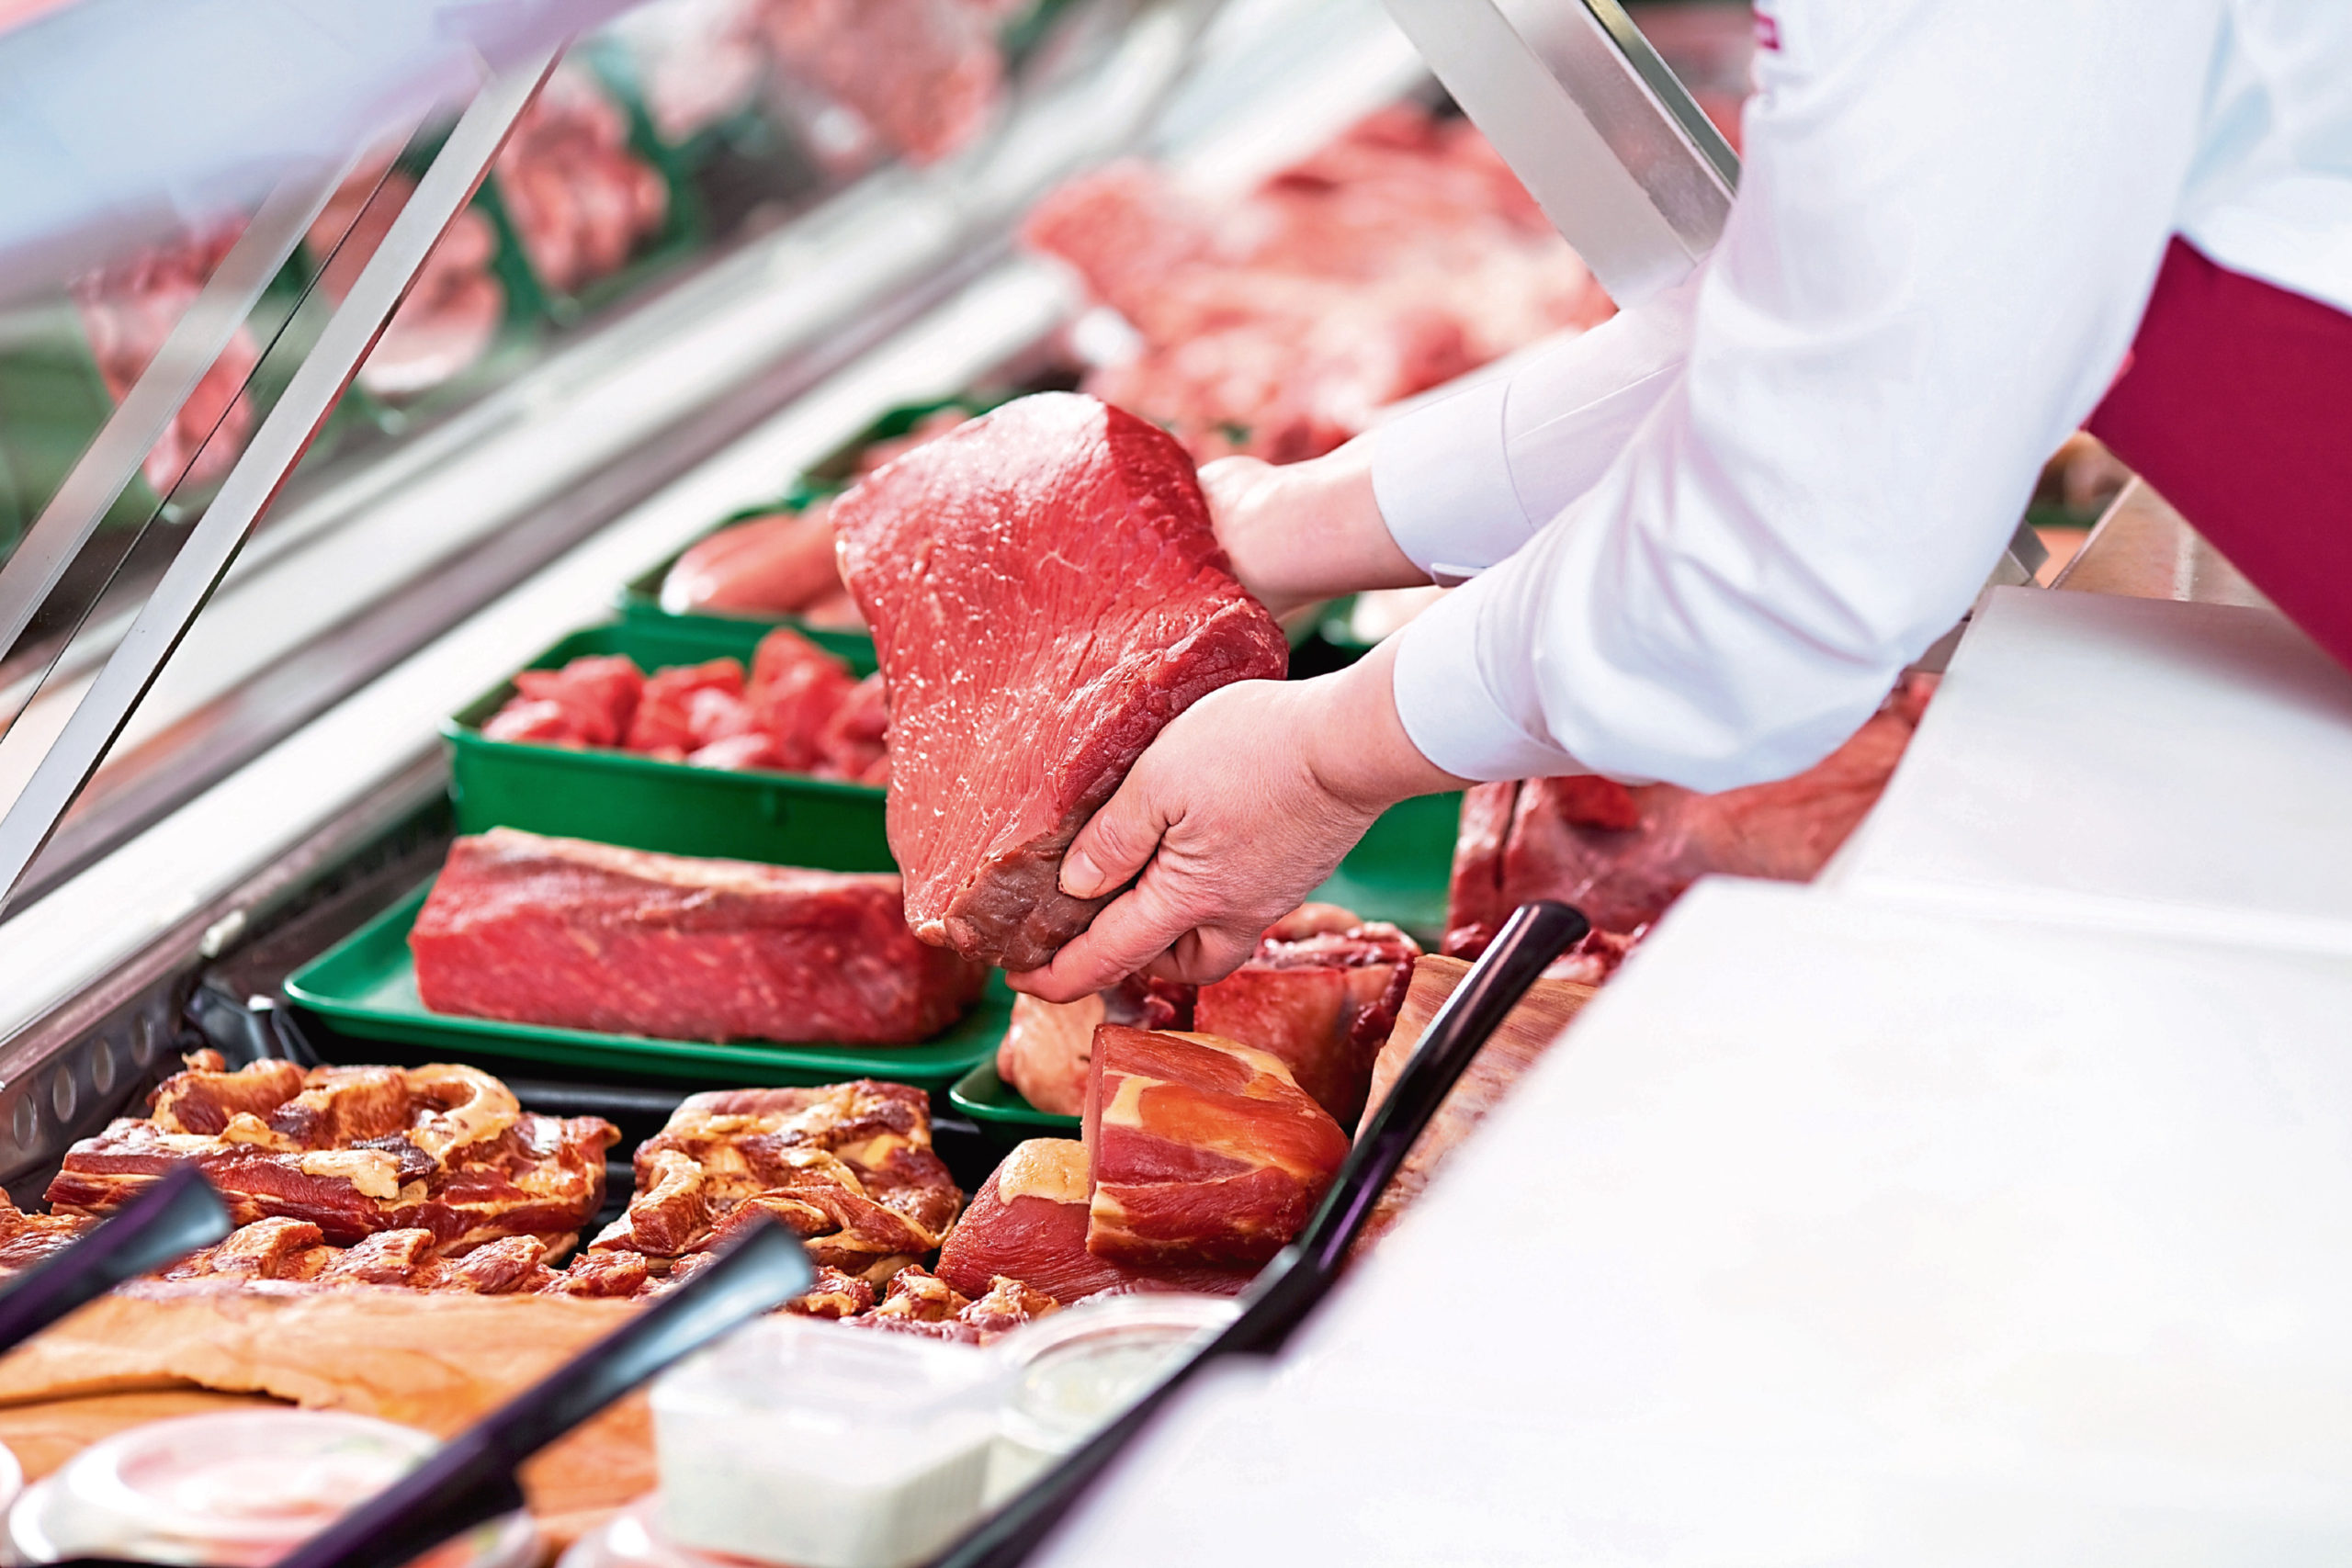 Scottish butchers are determined to ensure their products reach customers in the coming months.